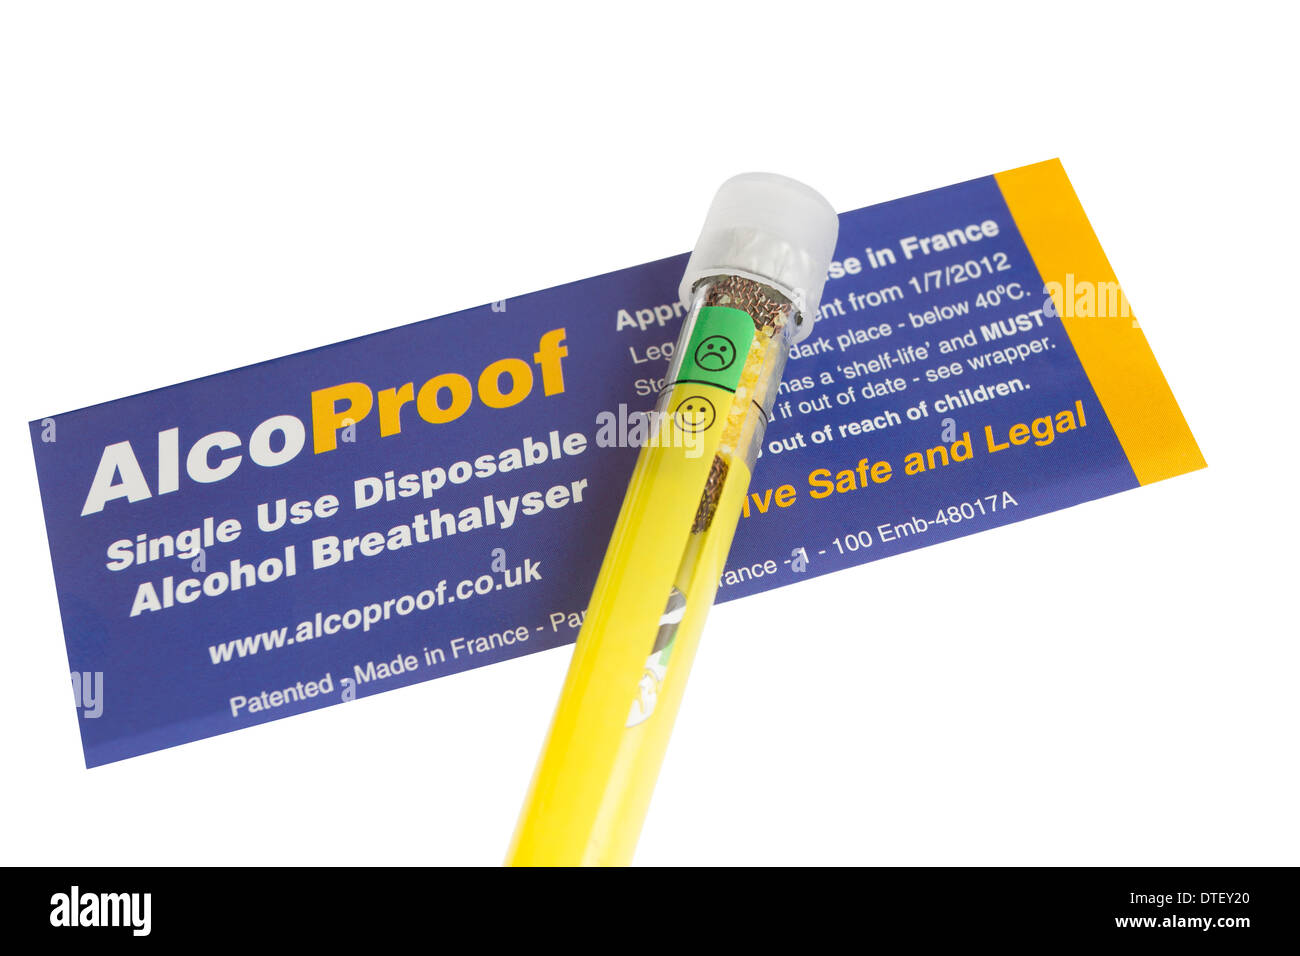 Disposable Alcohol Breathalyser Suitable for Use in France EU Stock Photo